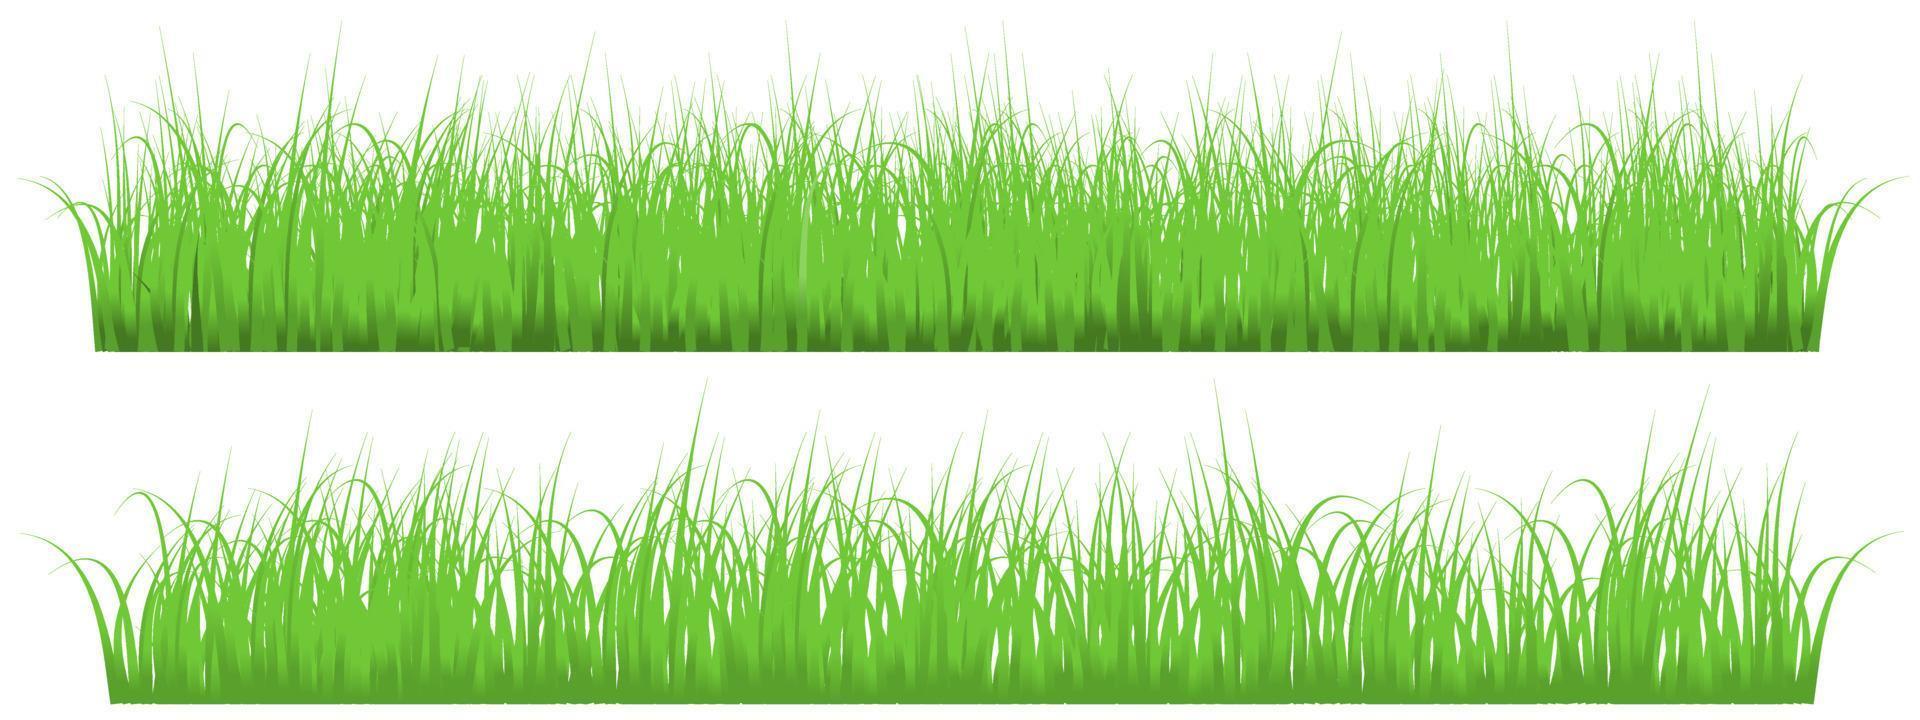 green grass banner vector isolated on white background